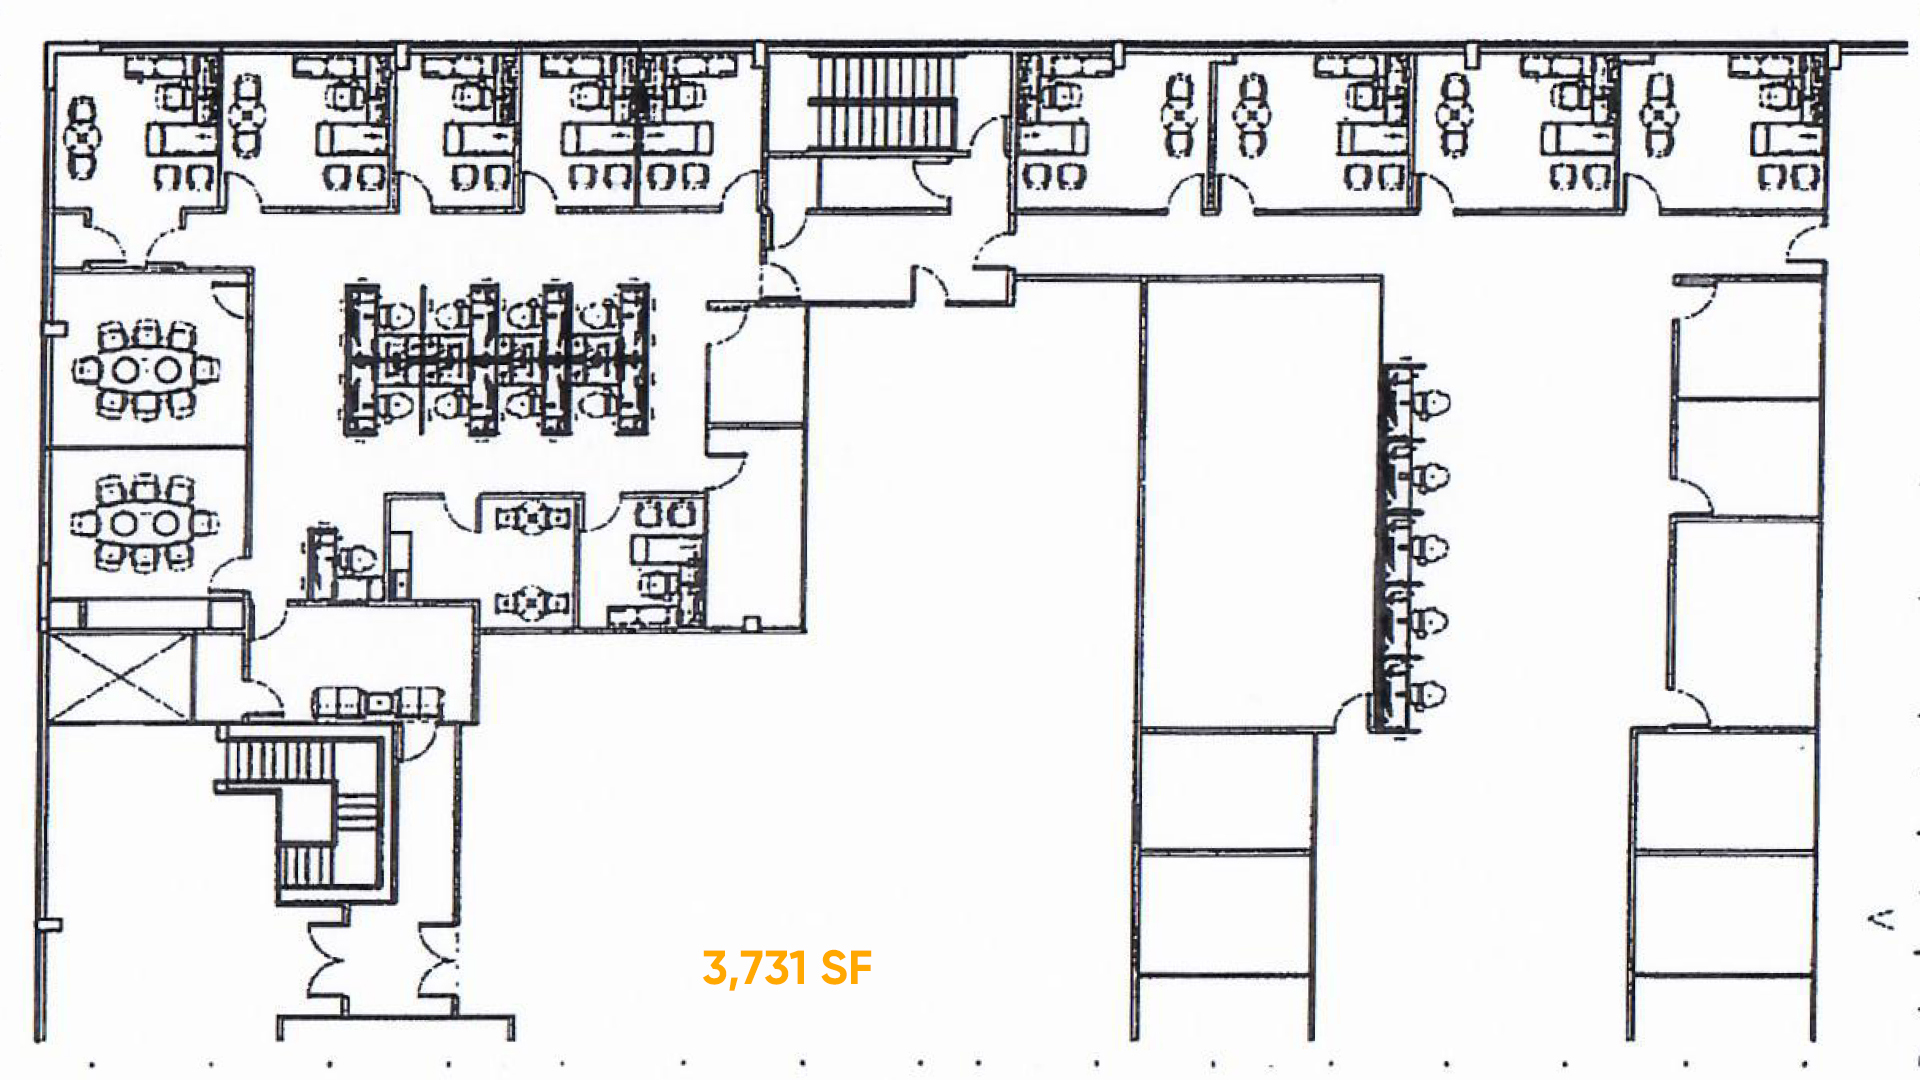 10021 Balls Ford Rd - floor plan 3,731 RSF